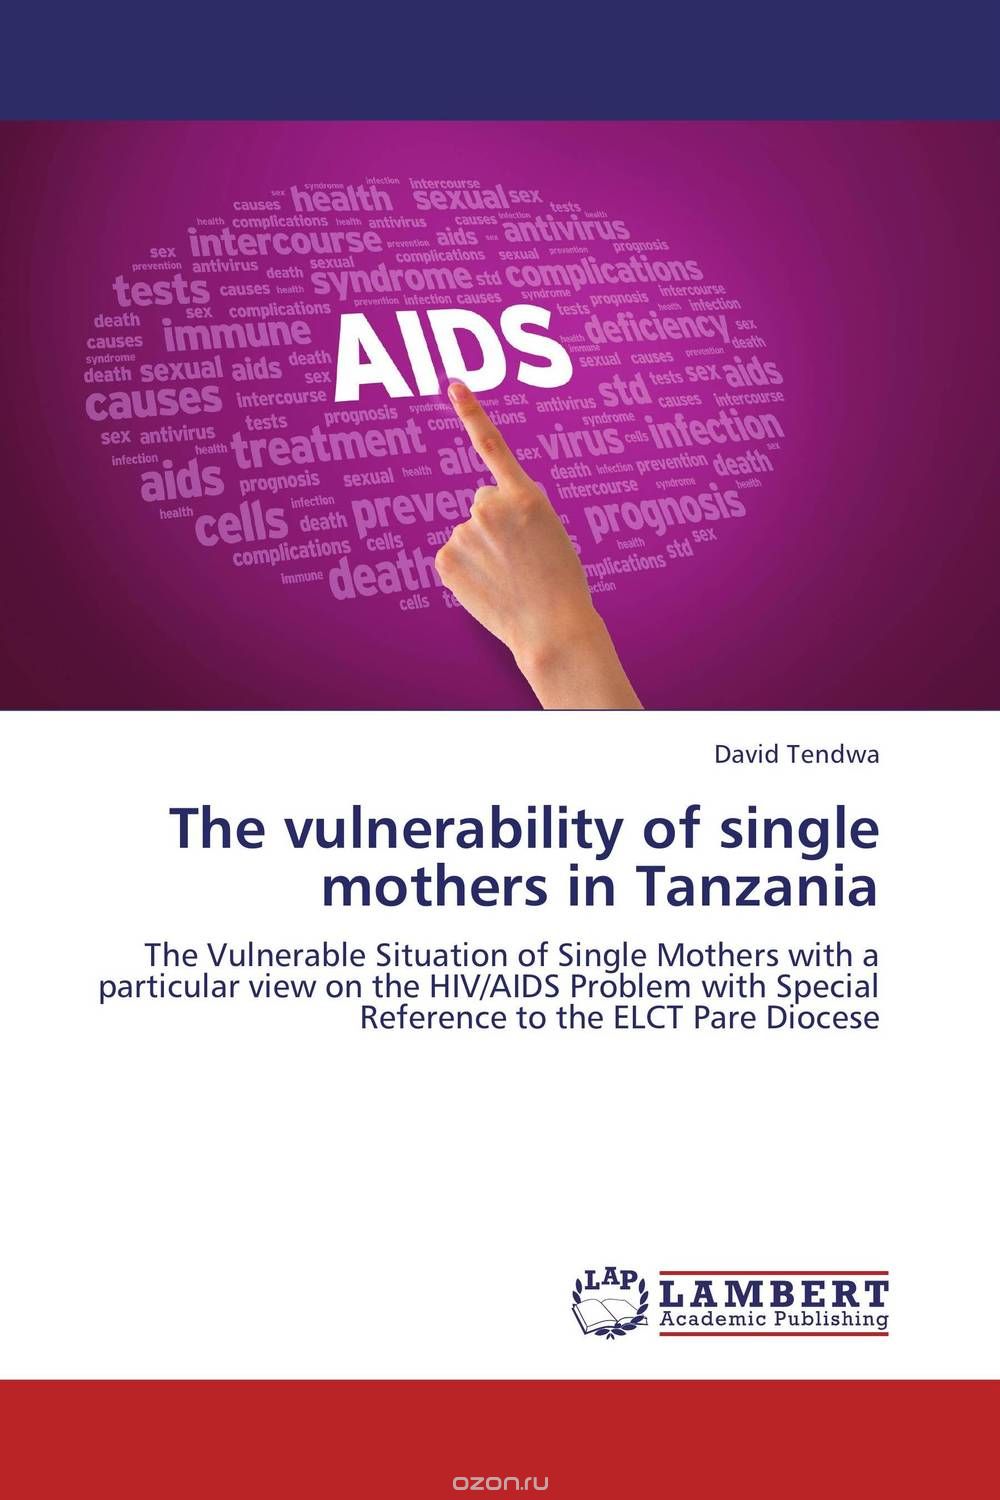 The vulnerability of single mothers in Tanzania